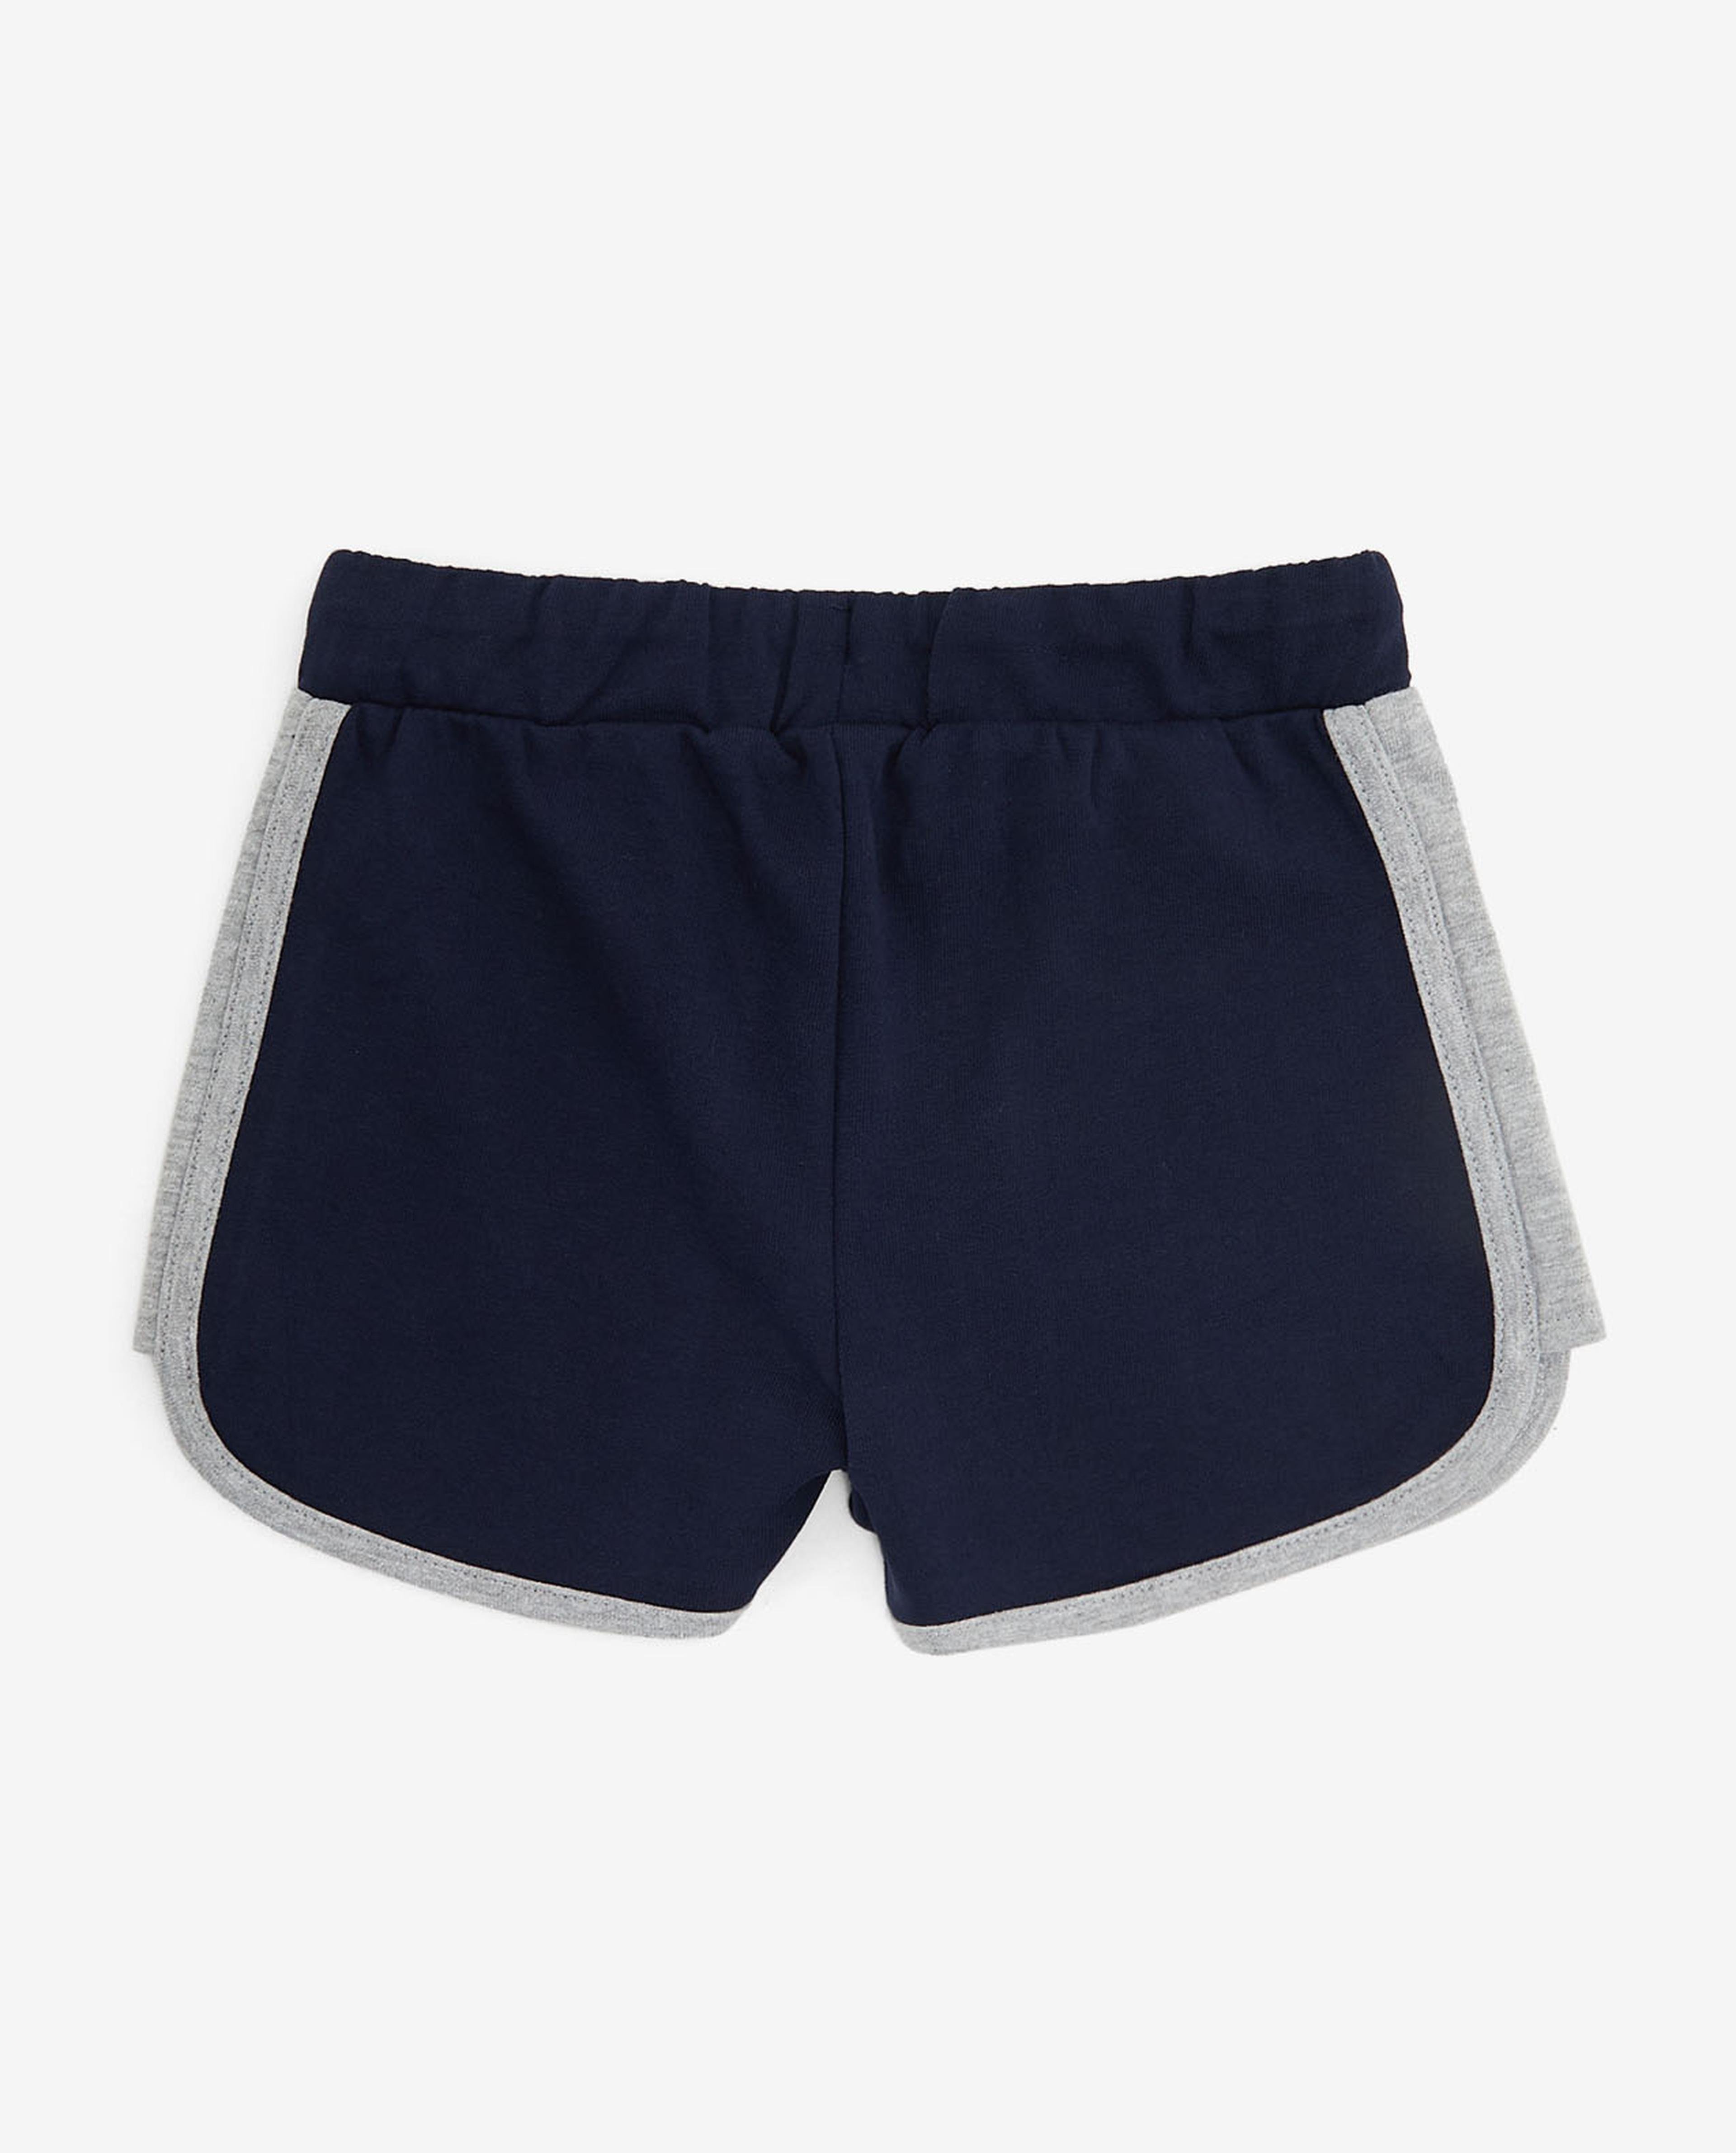 Blue Knit Shorts For Girls